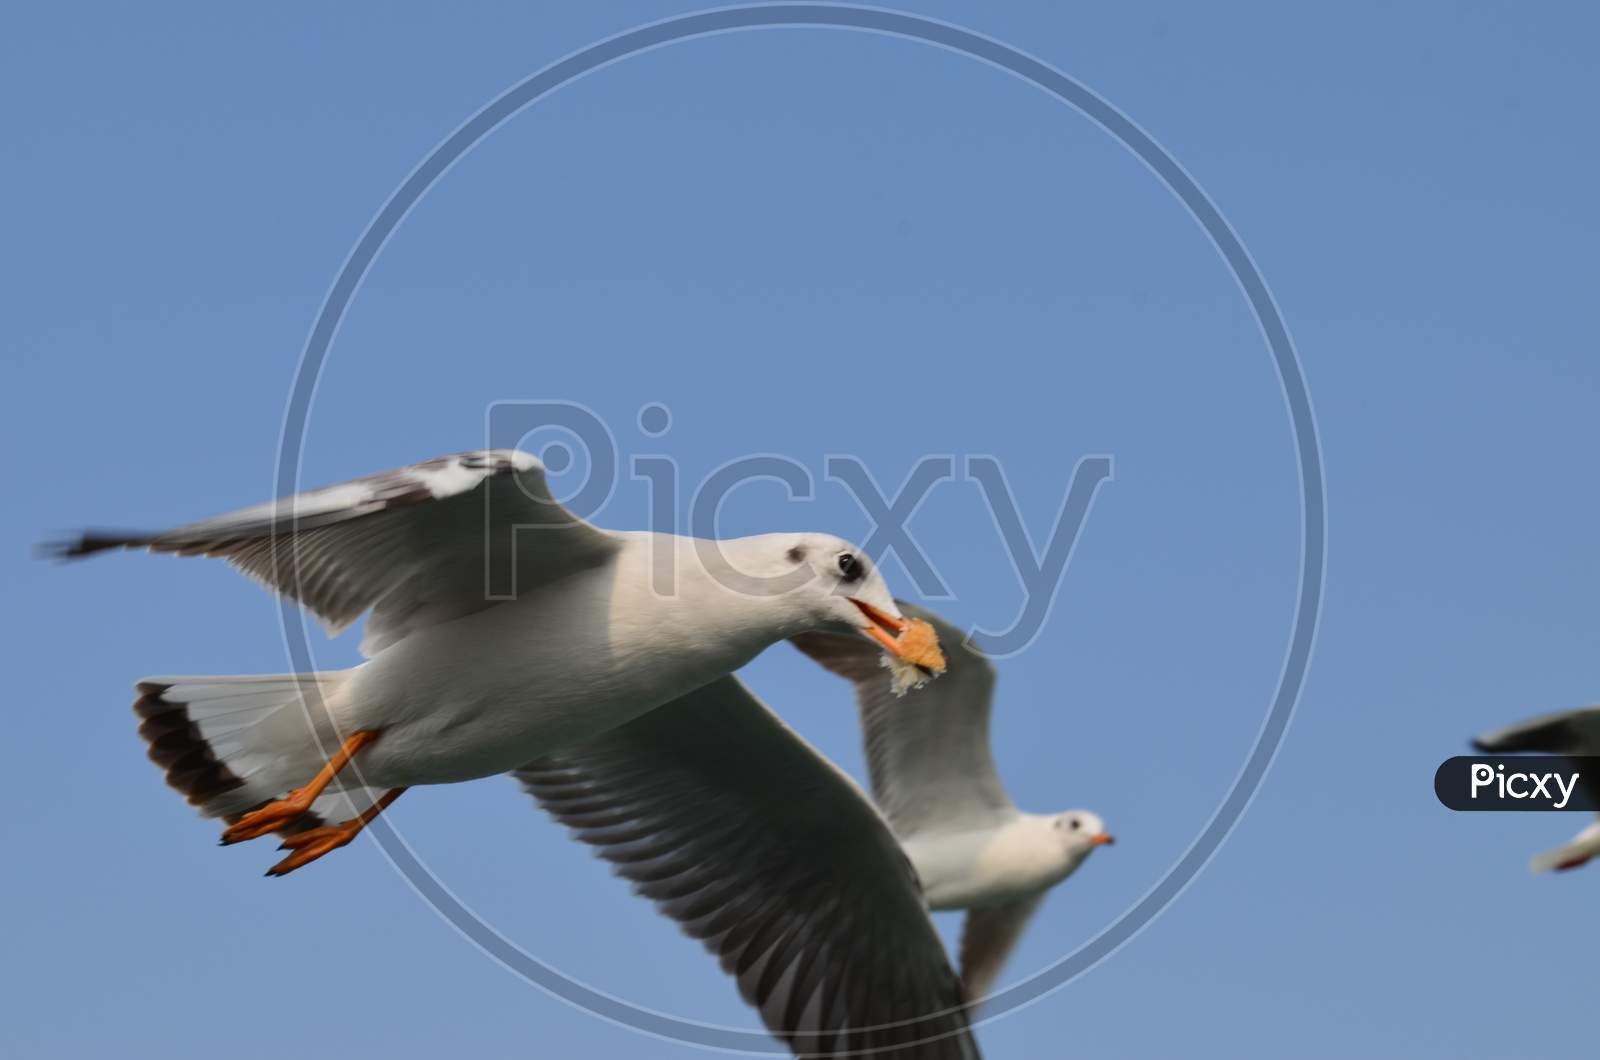 Seagull in Action